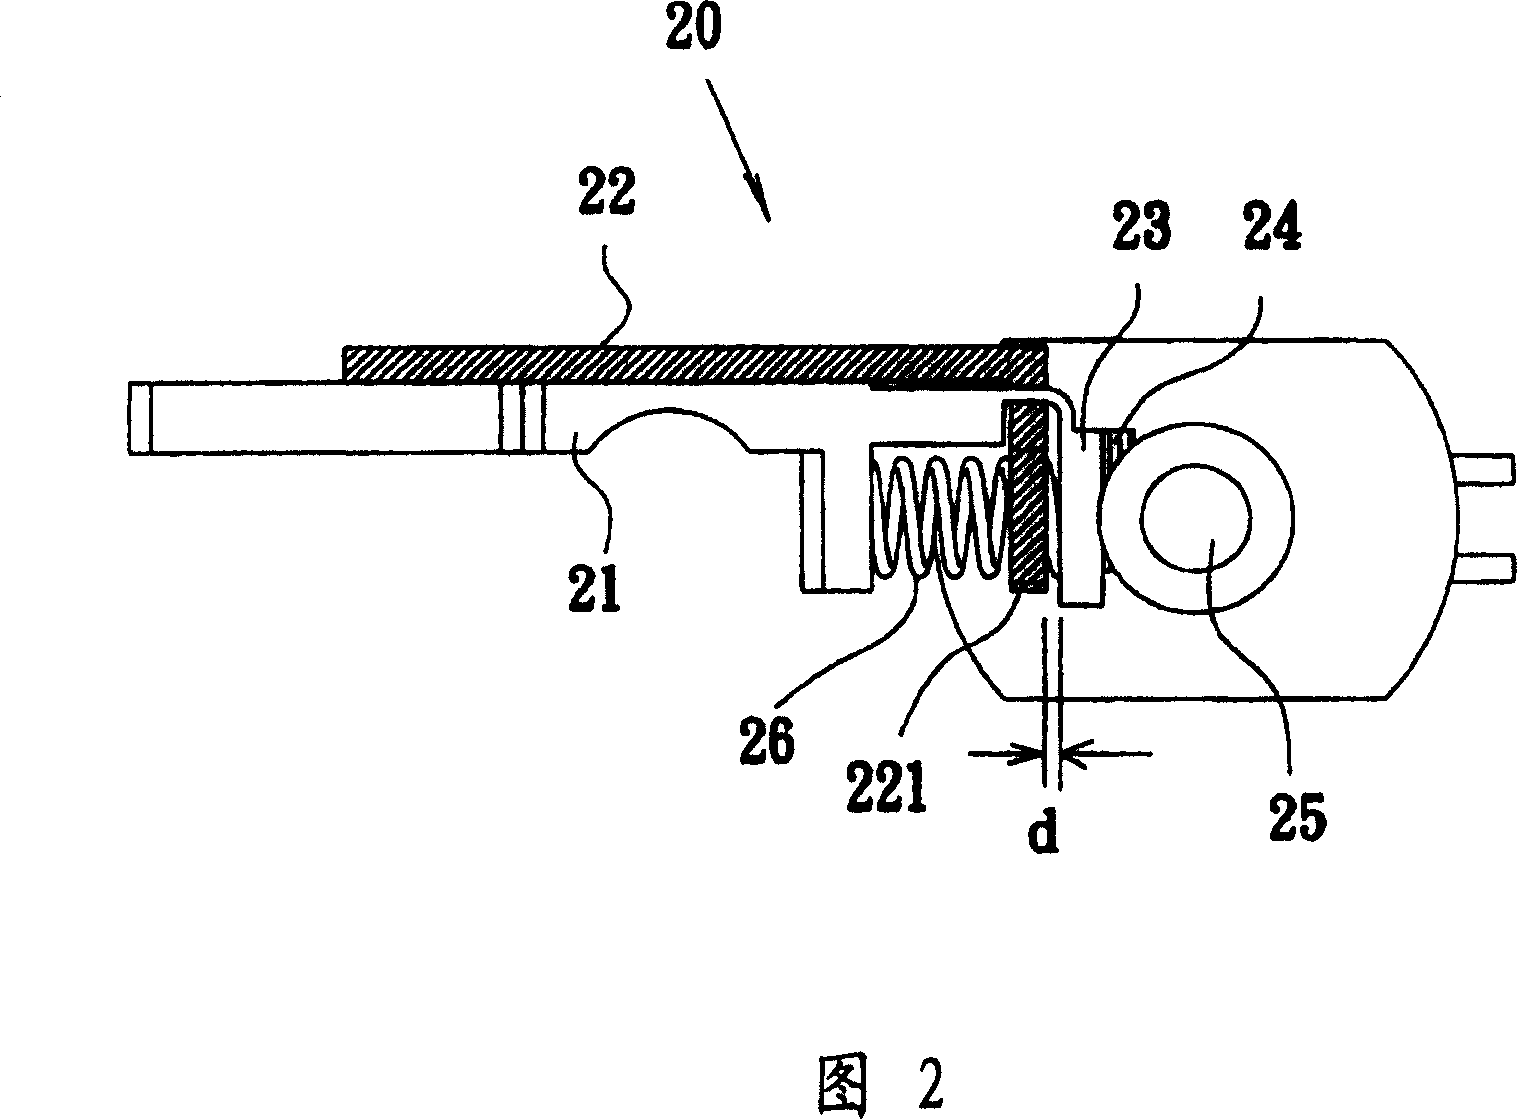 Structure for preventing gear slippage in optical disk drive